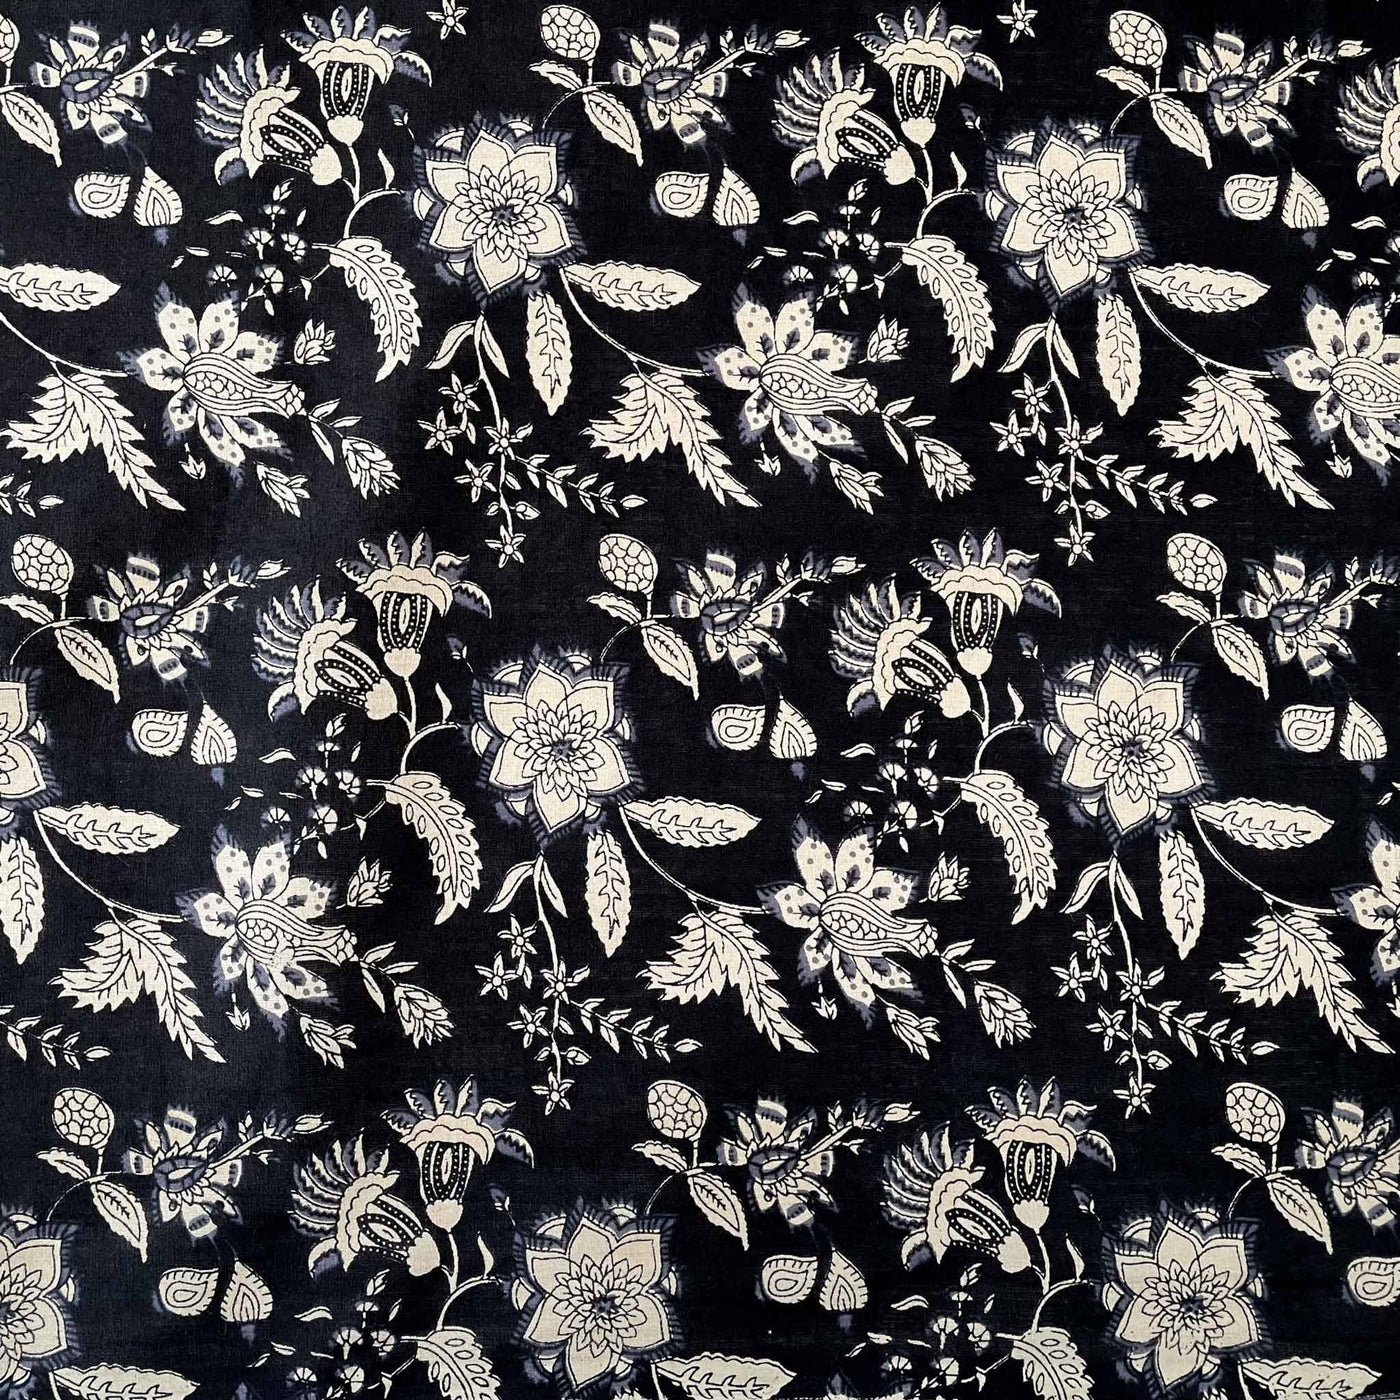 Fabric Pandit Fabric Black & Cream Egyptian Floral Hand Block Printed Pure Cotton Fabric (Width 43 inches)